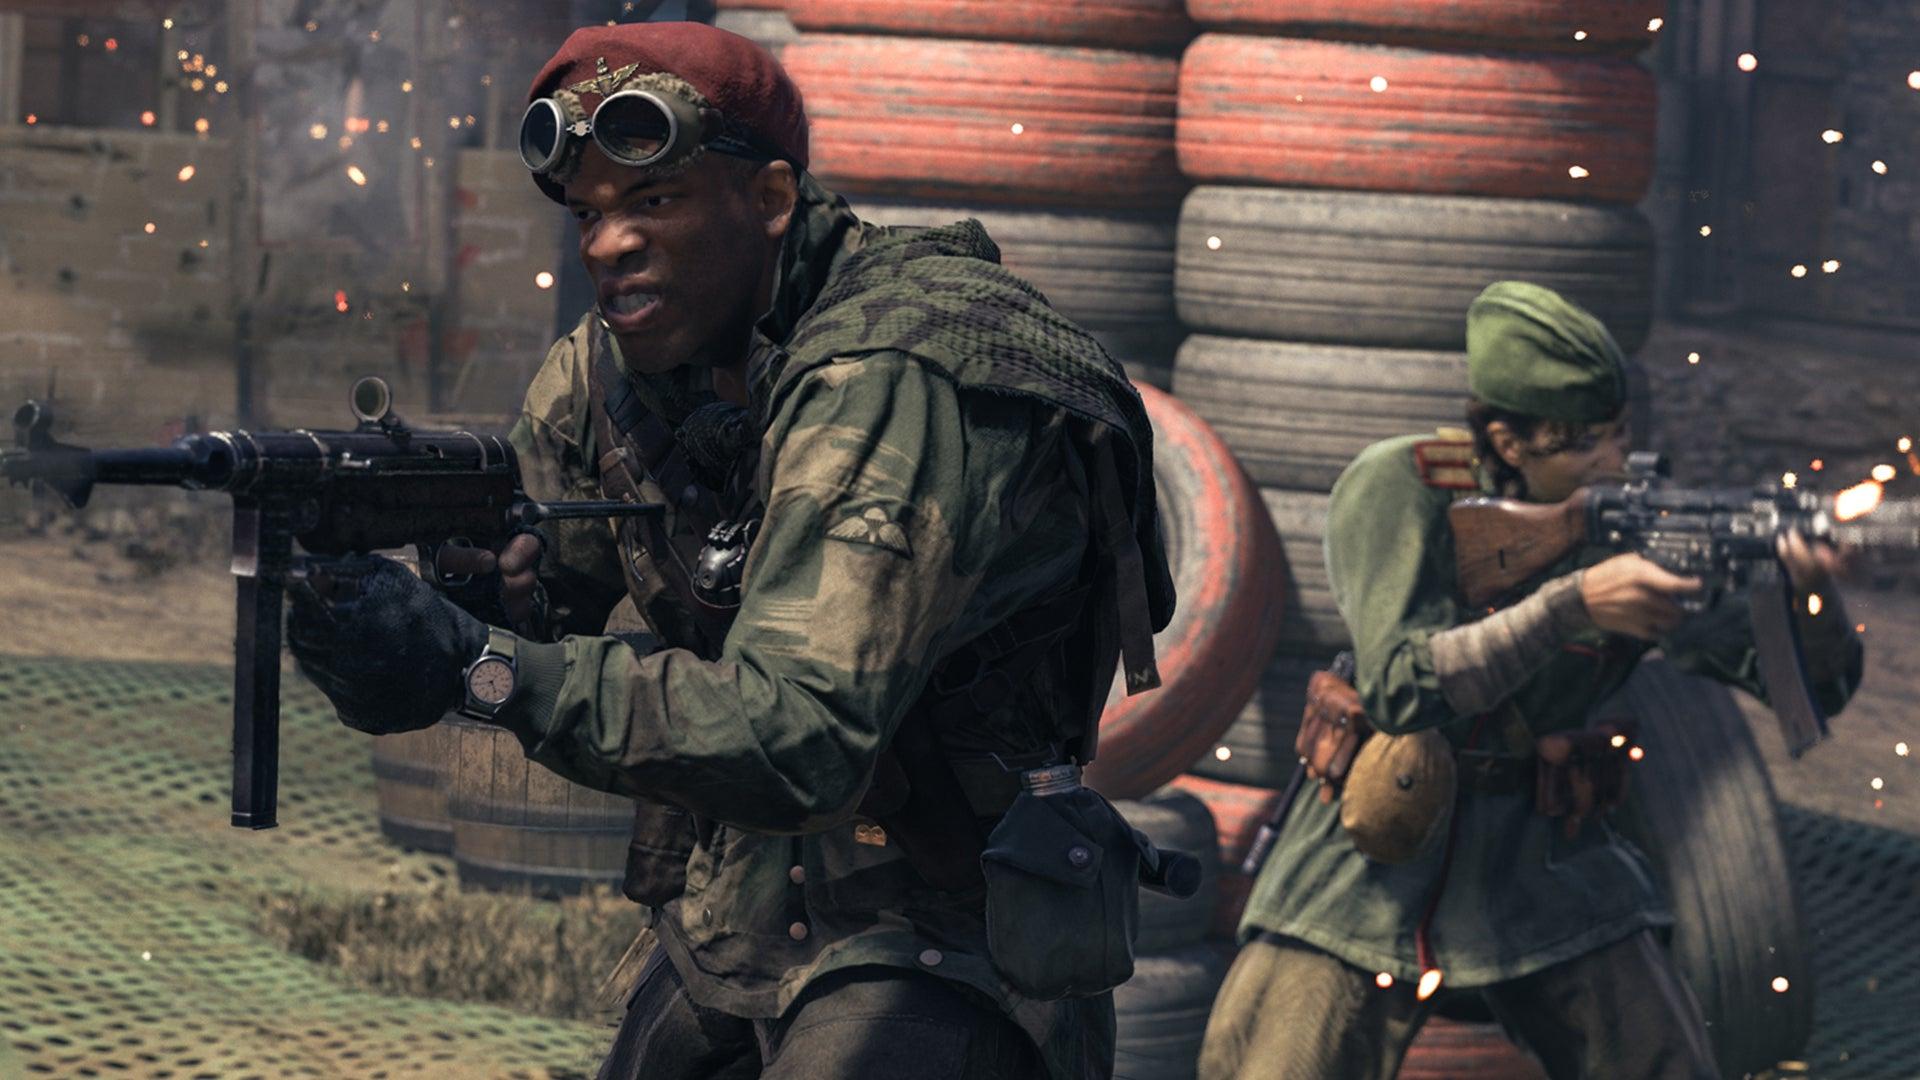 "Call of Duty: Vanguard" Disables Special Event - Widespread Crashing Issue